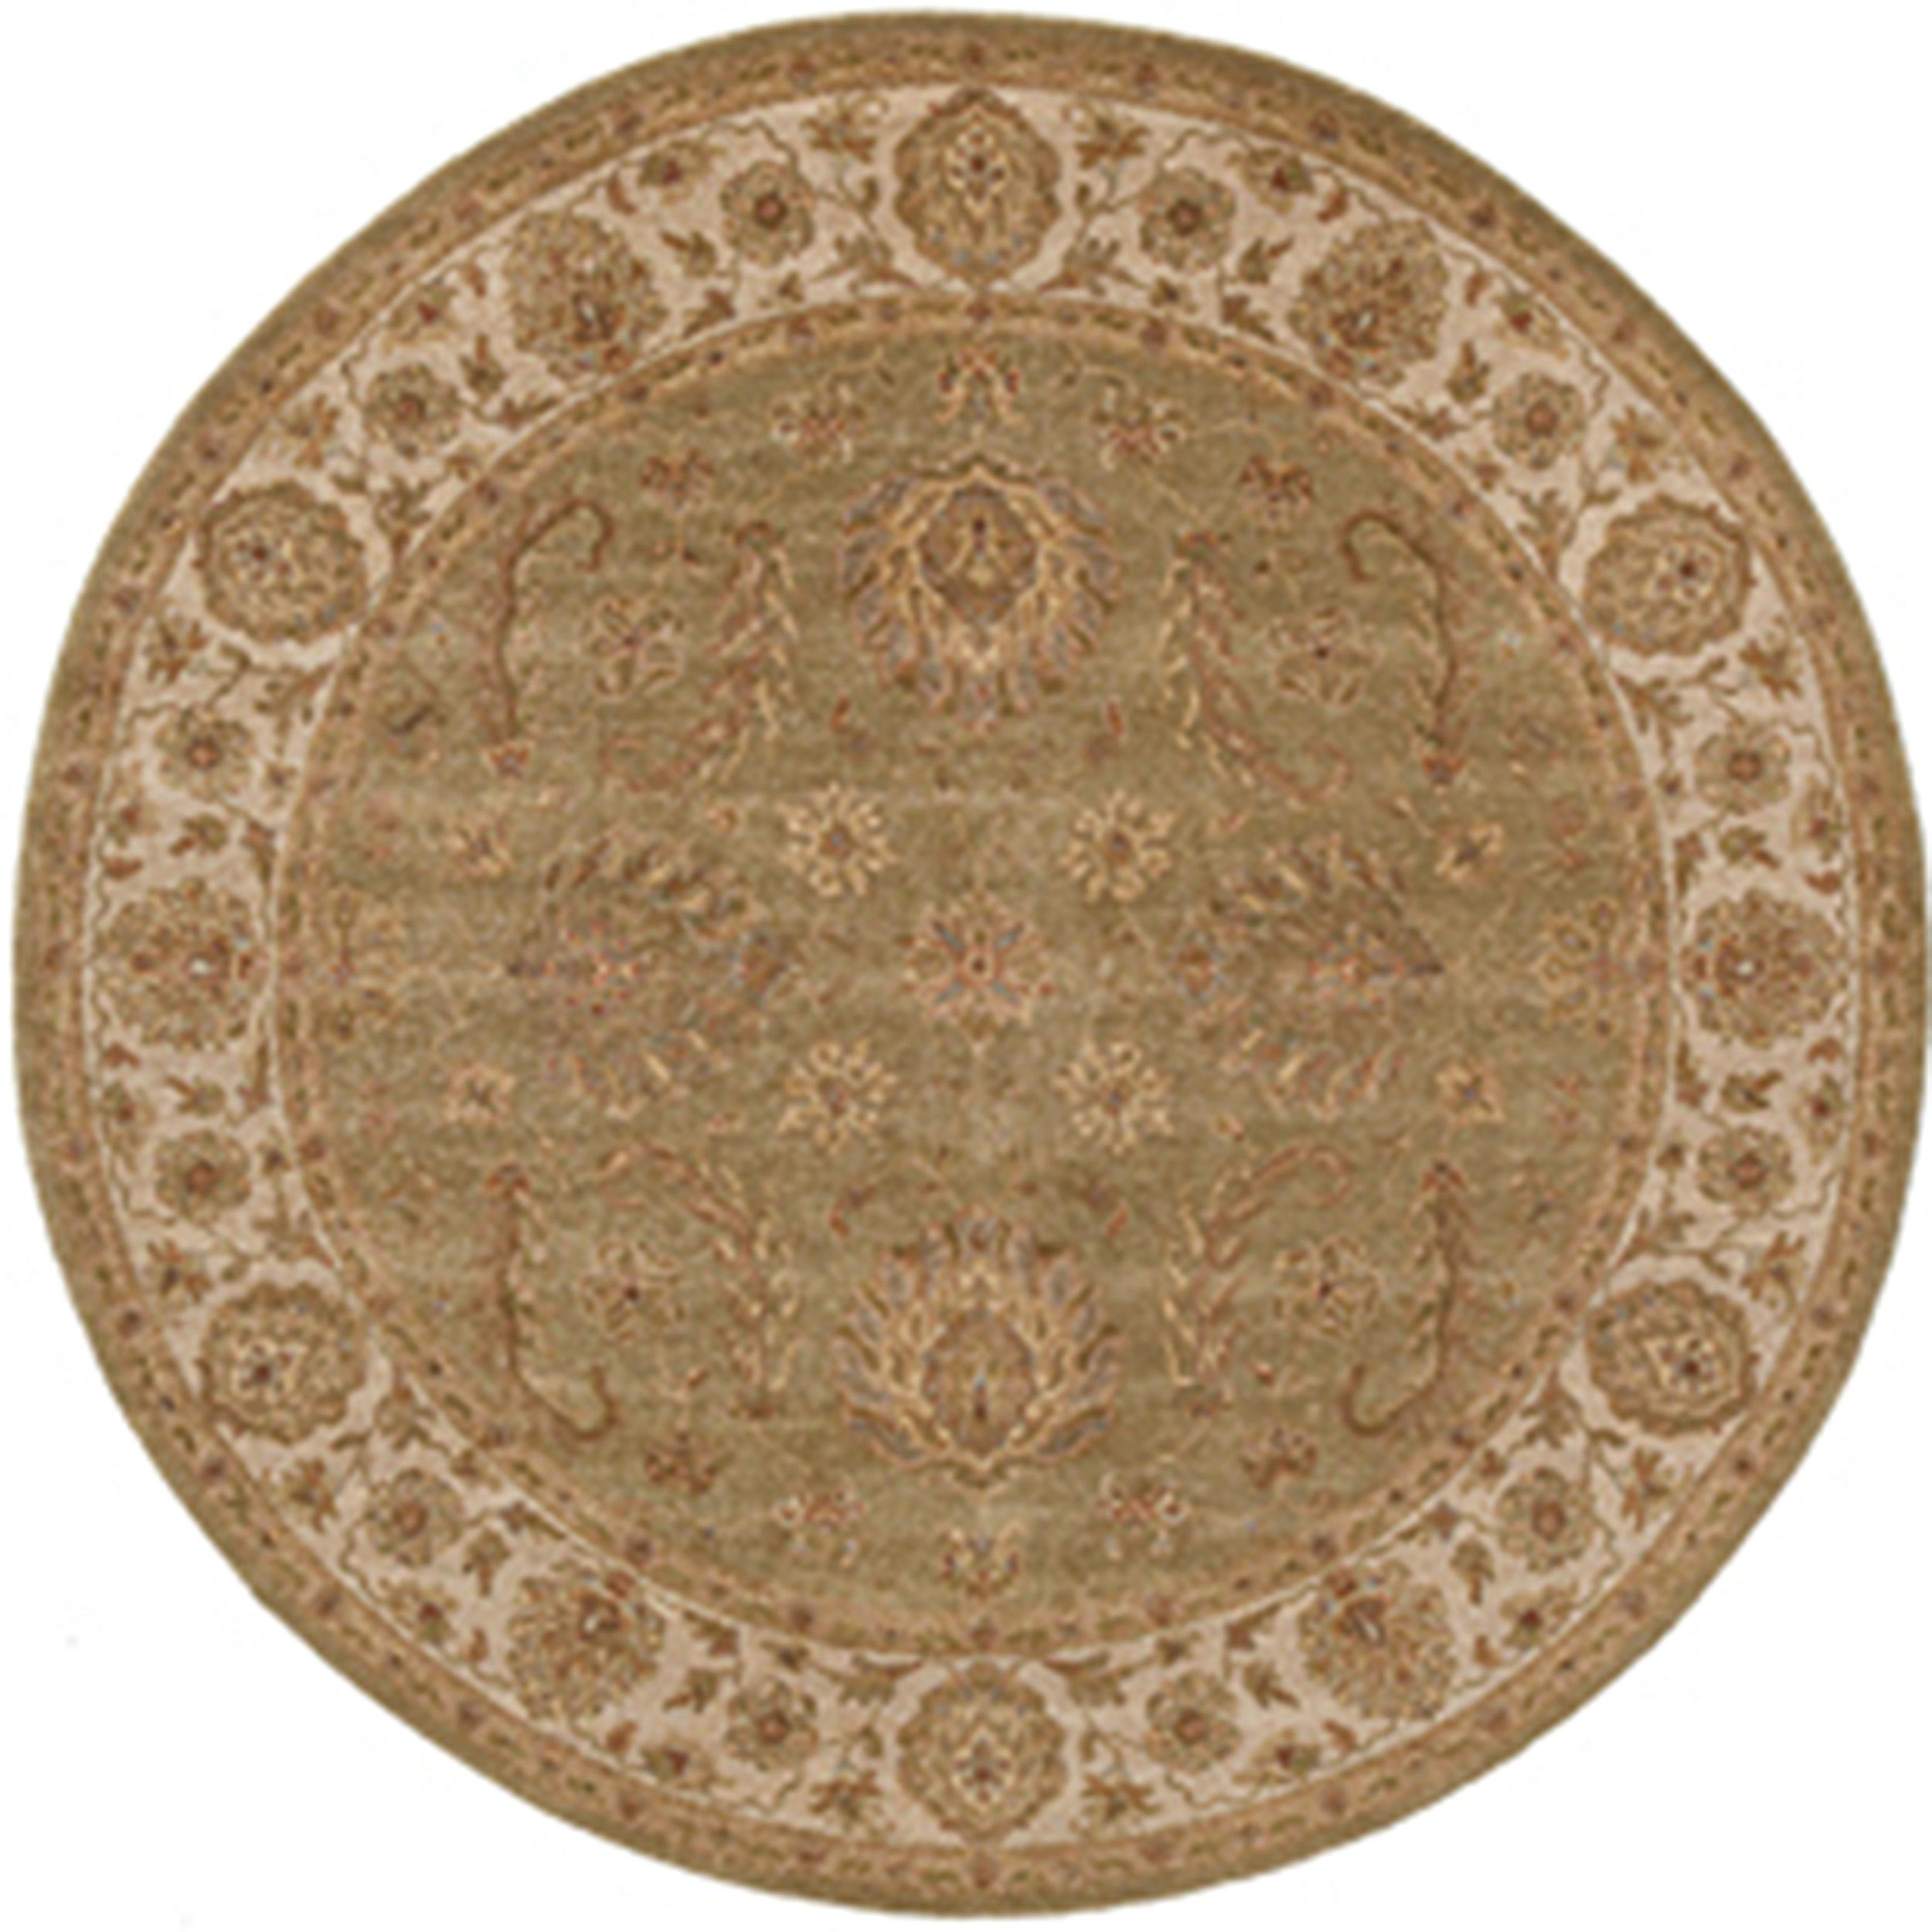 Luxury Traditional Hand-Knotted Amritsar Agra Lt. Green/Ivory 12x12 Round Rug In New Condition For Sale In Secaucus, NJ